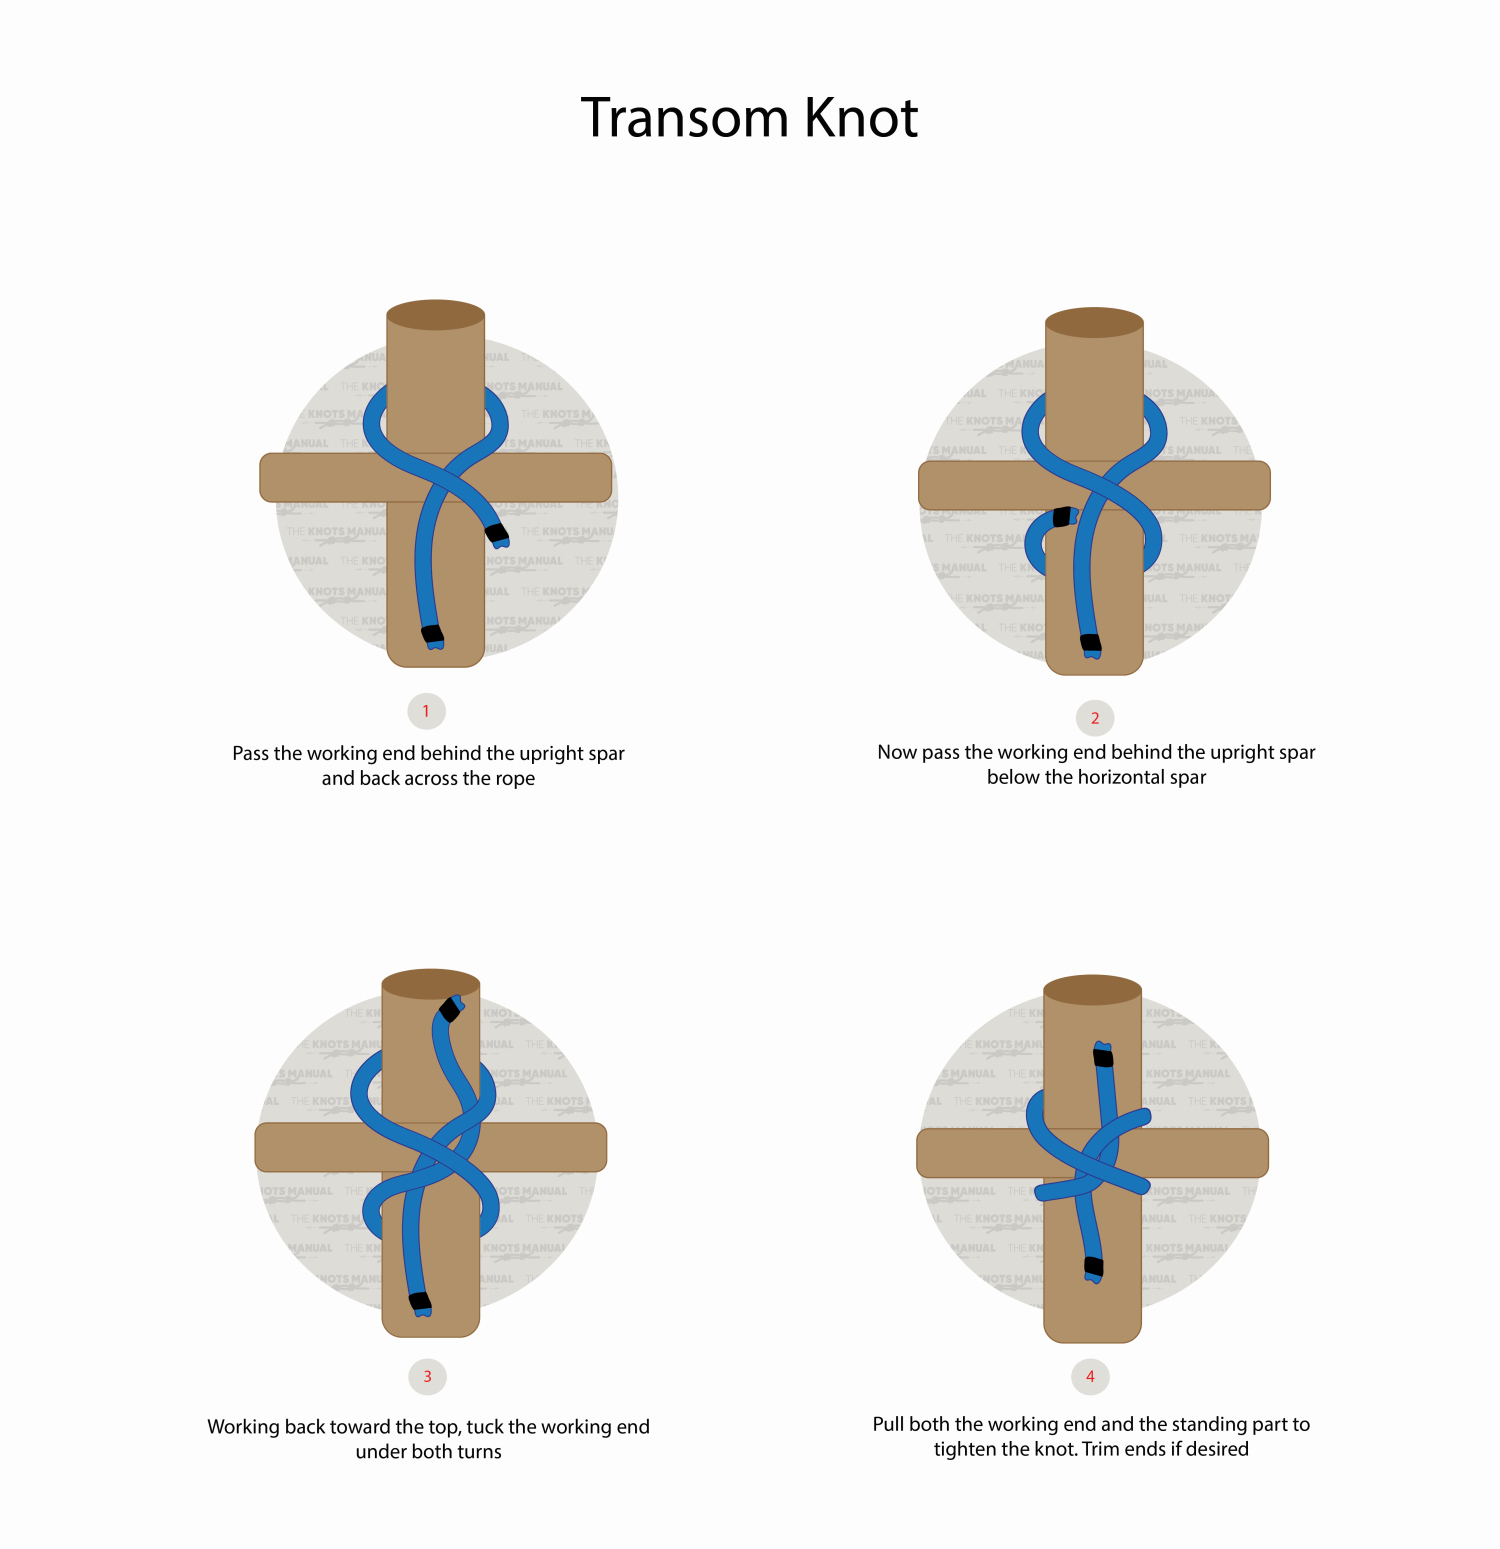 How to Tie a Transom Knot Step By Step